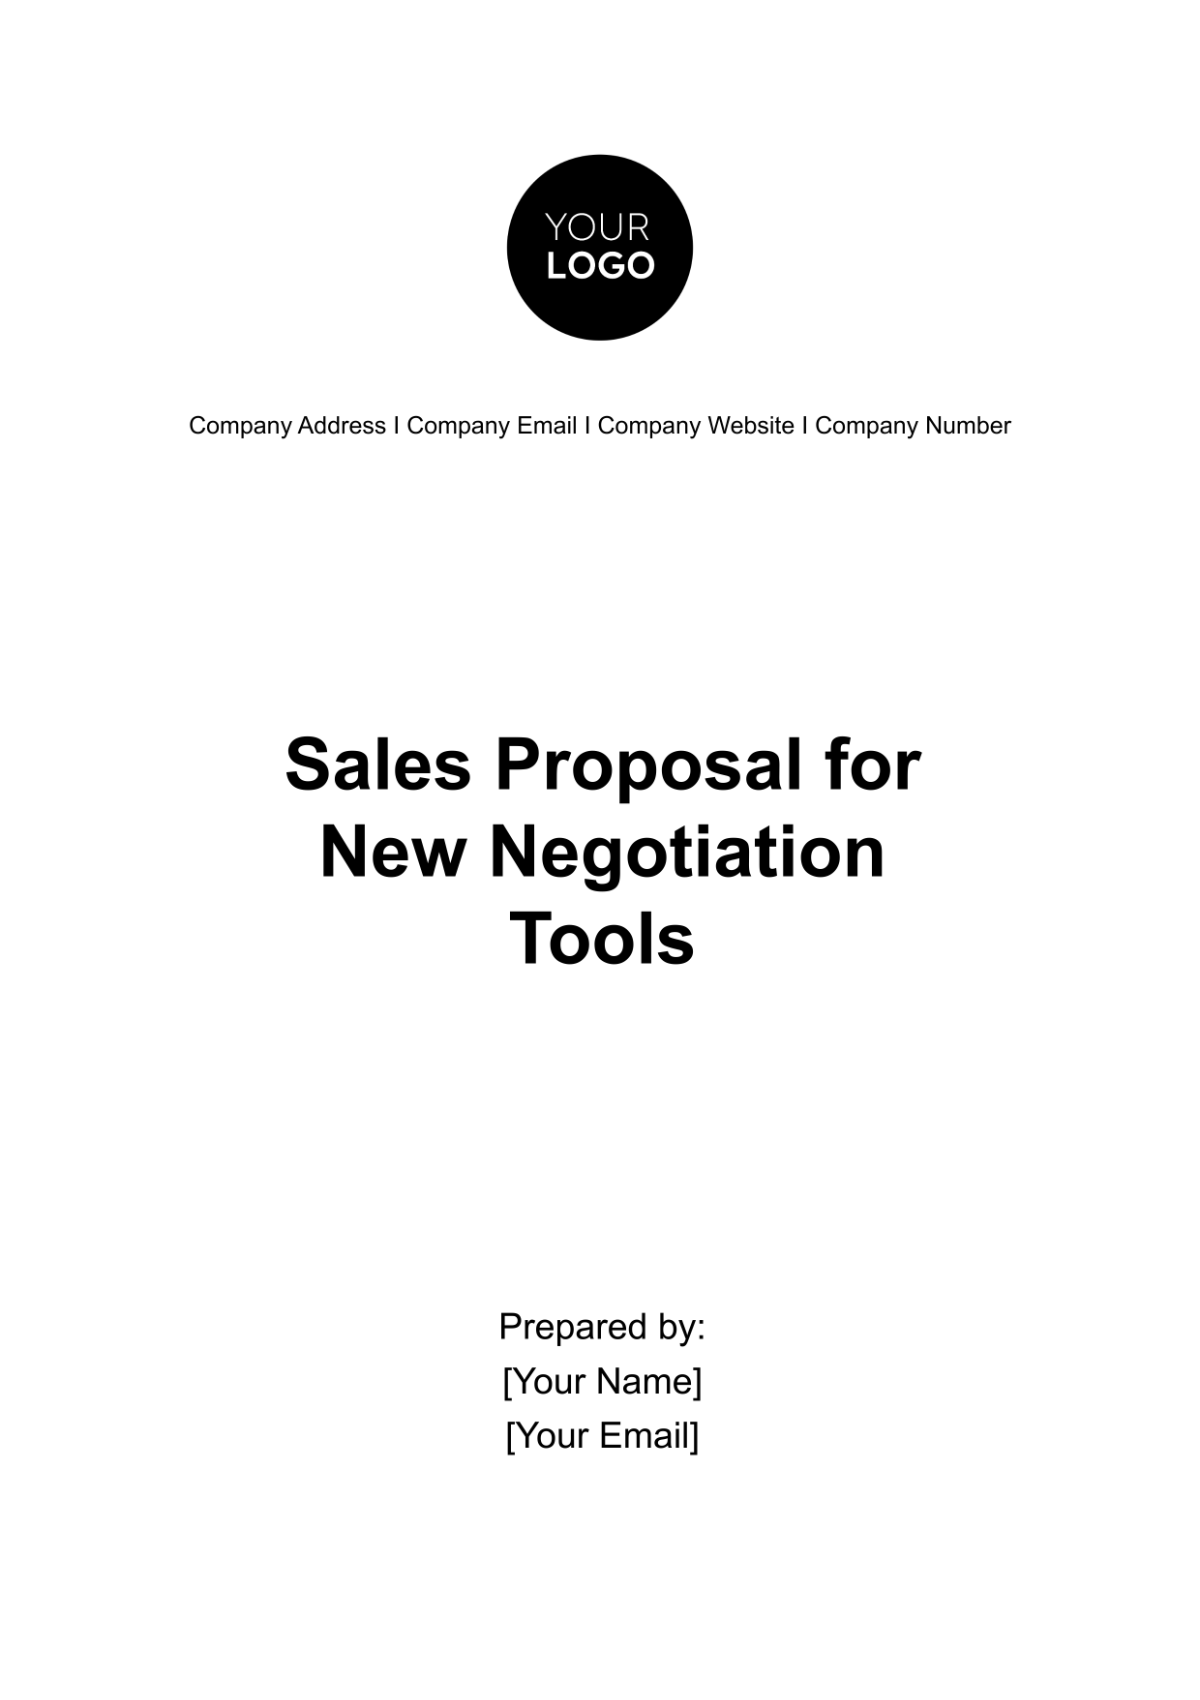 Free Sales Proposal for New Negotiation Tools Template